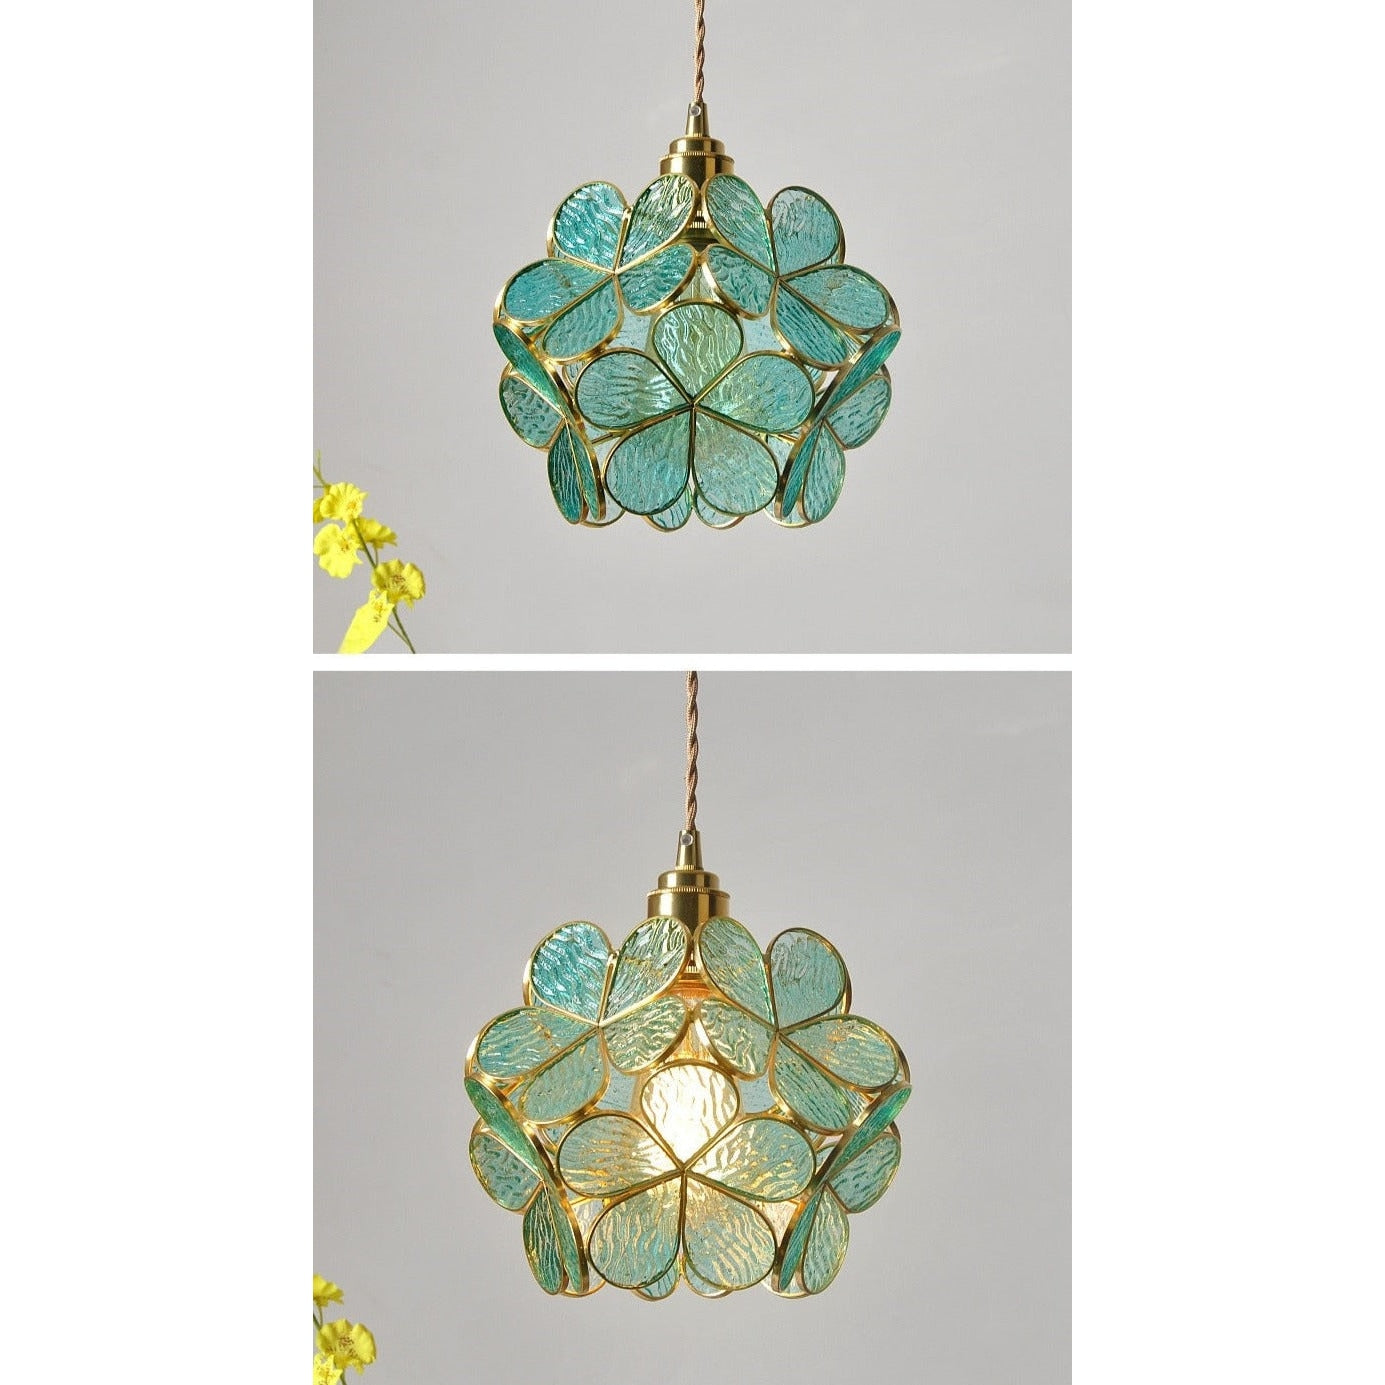 Colorful Glass Pendant Lamp | Round Flower Hanging Lights For Living Room Kitchen Dining - Lamps